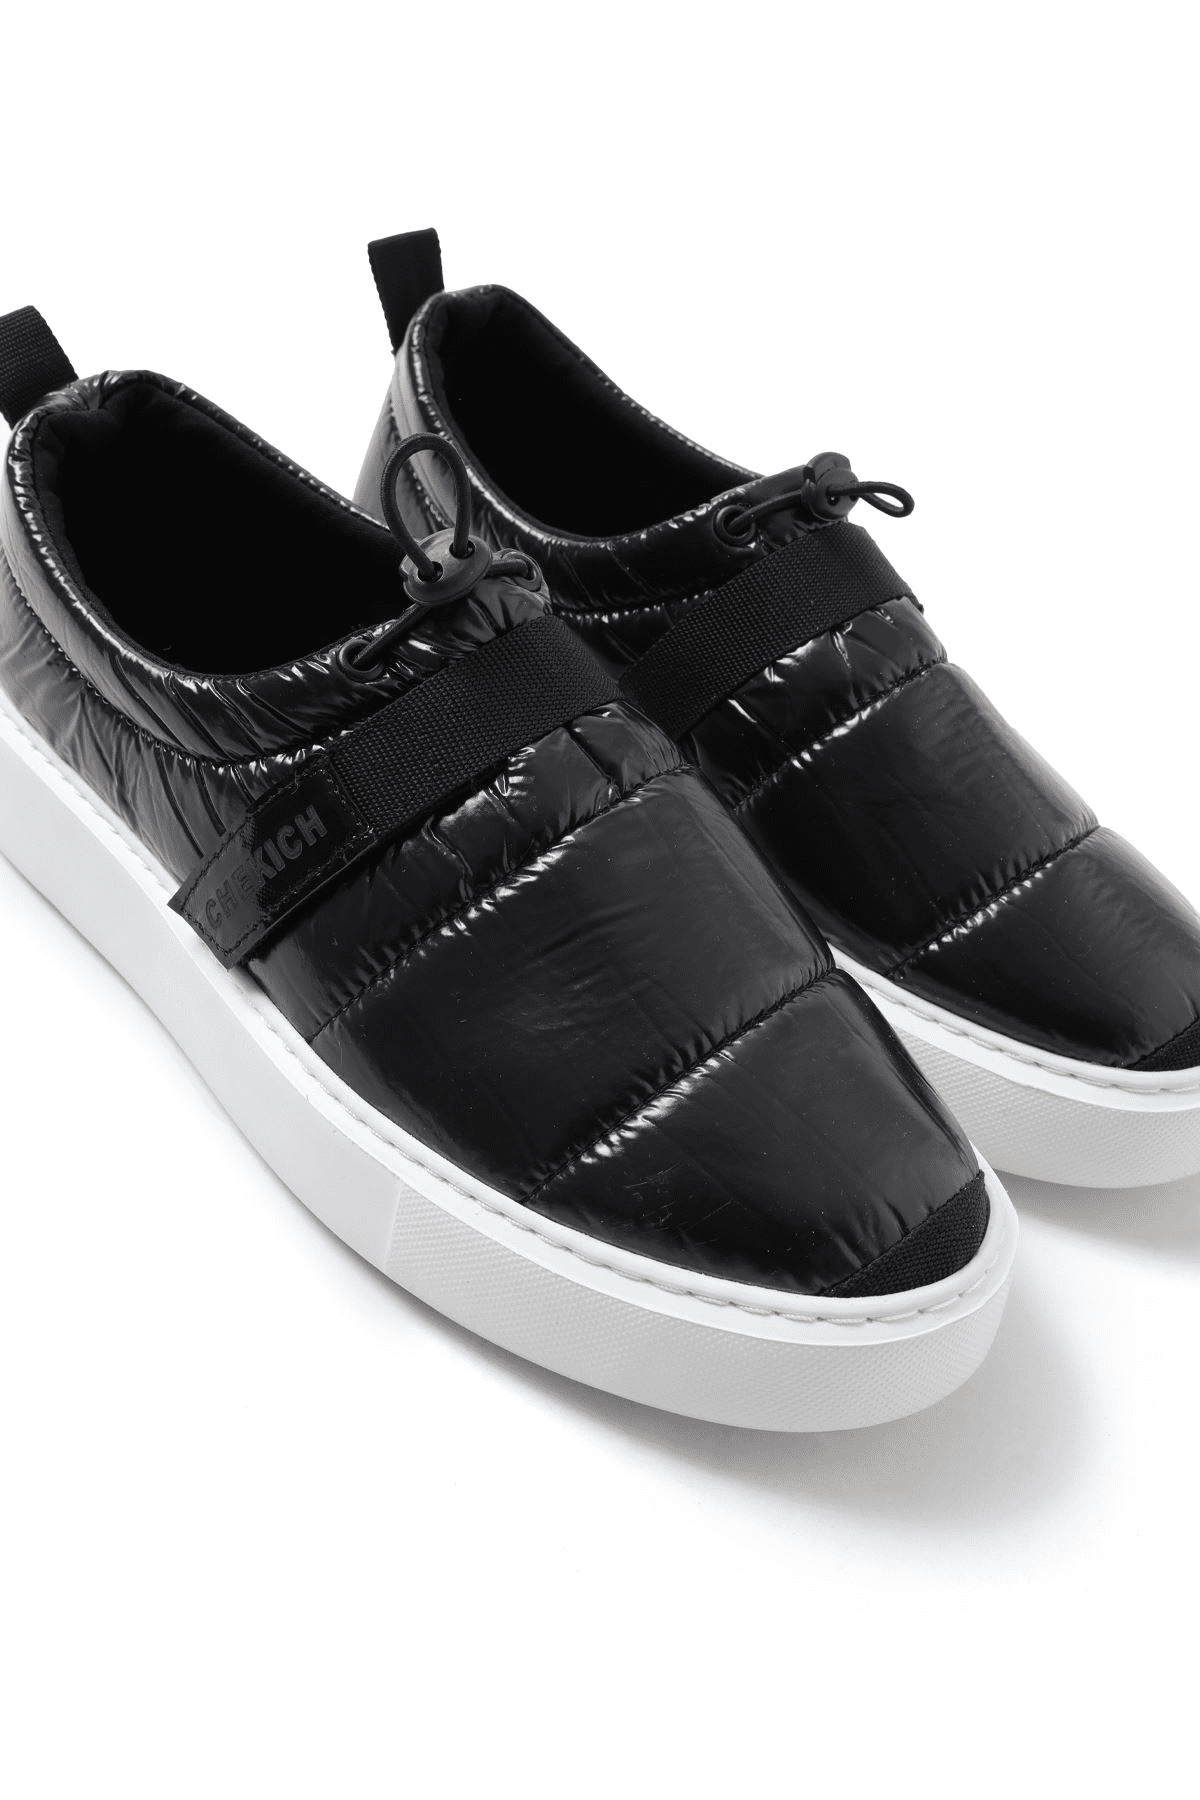 Chekich Men's Shoes Black Color Sneakers Artificial Leather Stitched Comfortable High White Sole Lightweight Odorless CH137 BT